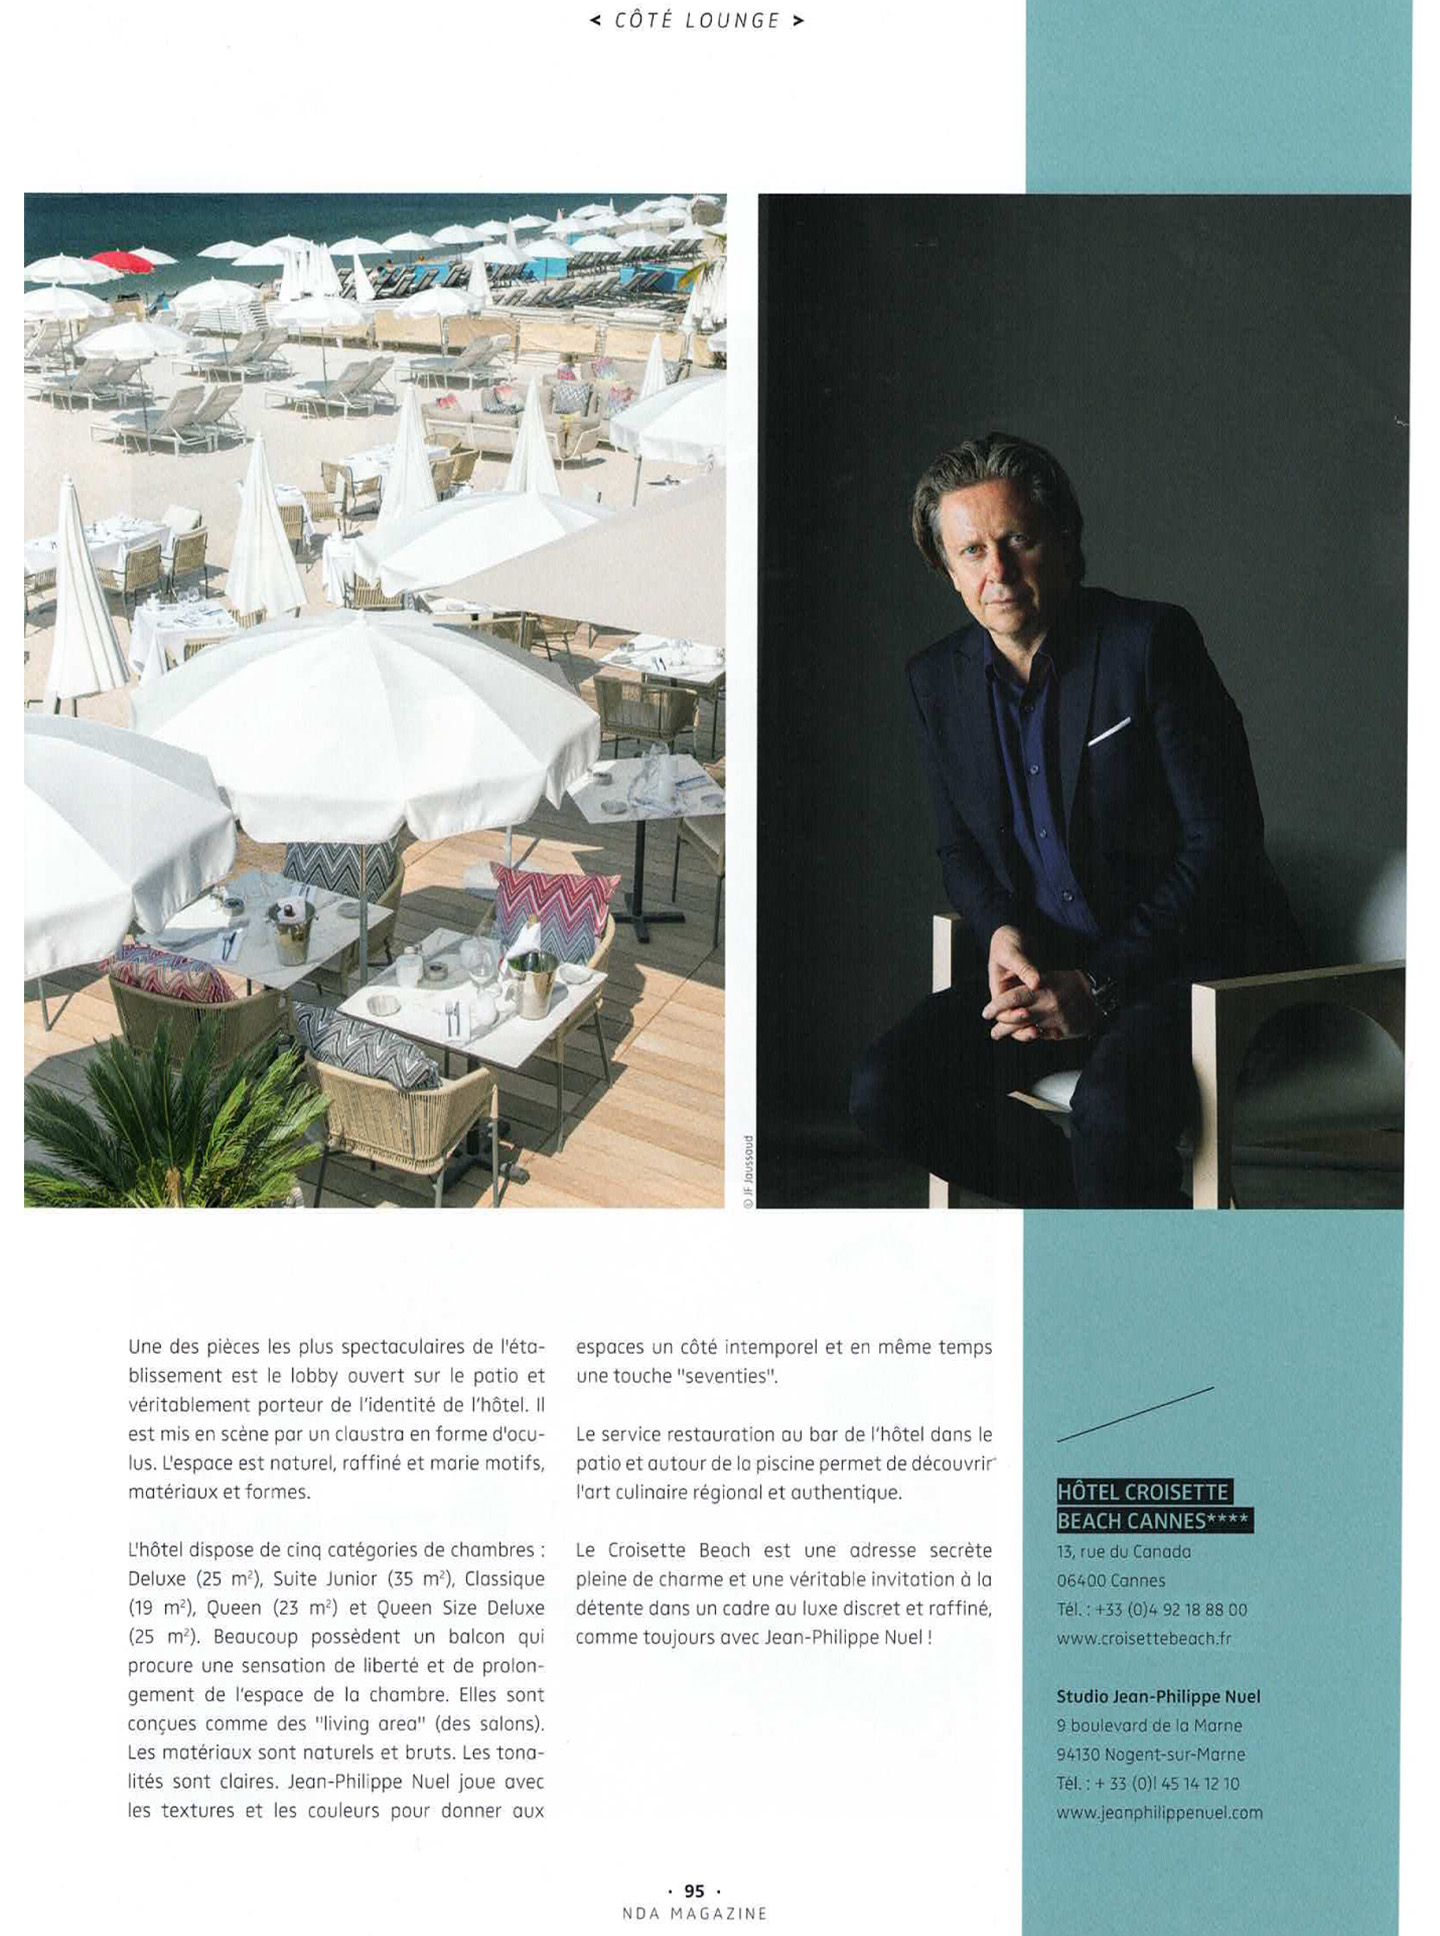 Article on the croisette beach cannes realized by the studio jean-Philippe Nuel in the magazine nda, new lifestyle hotel, luxury interior design, cannes, french riviera